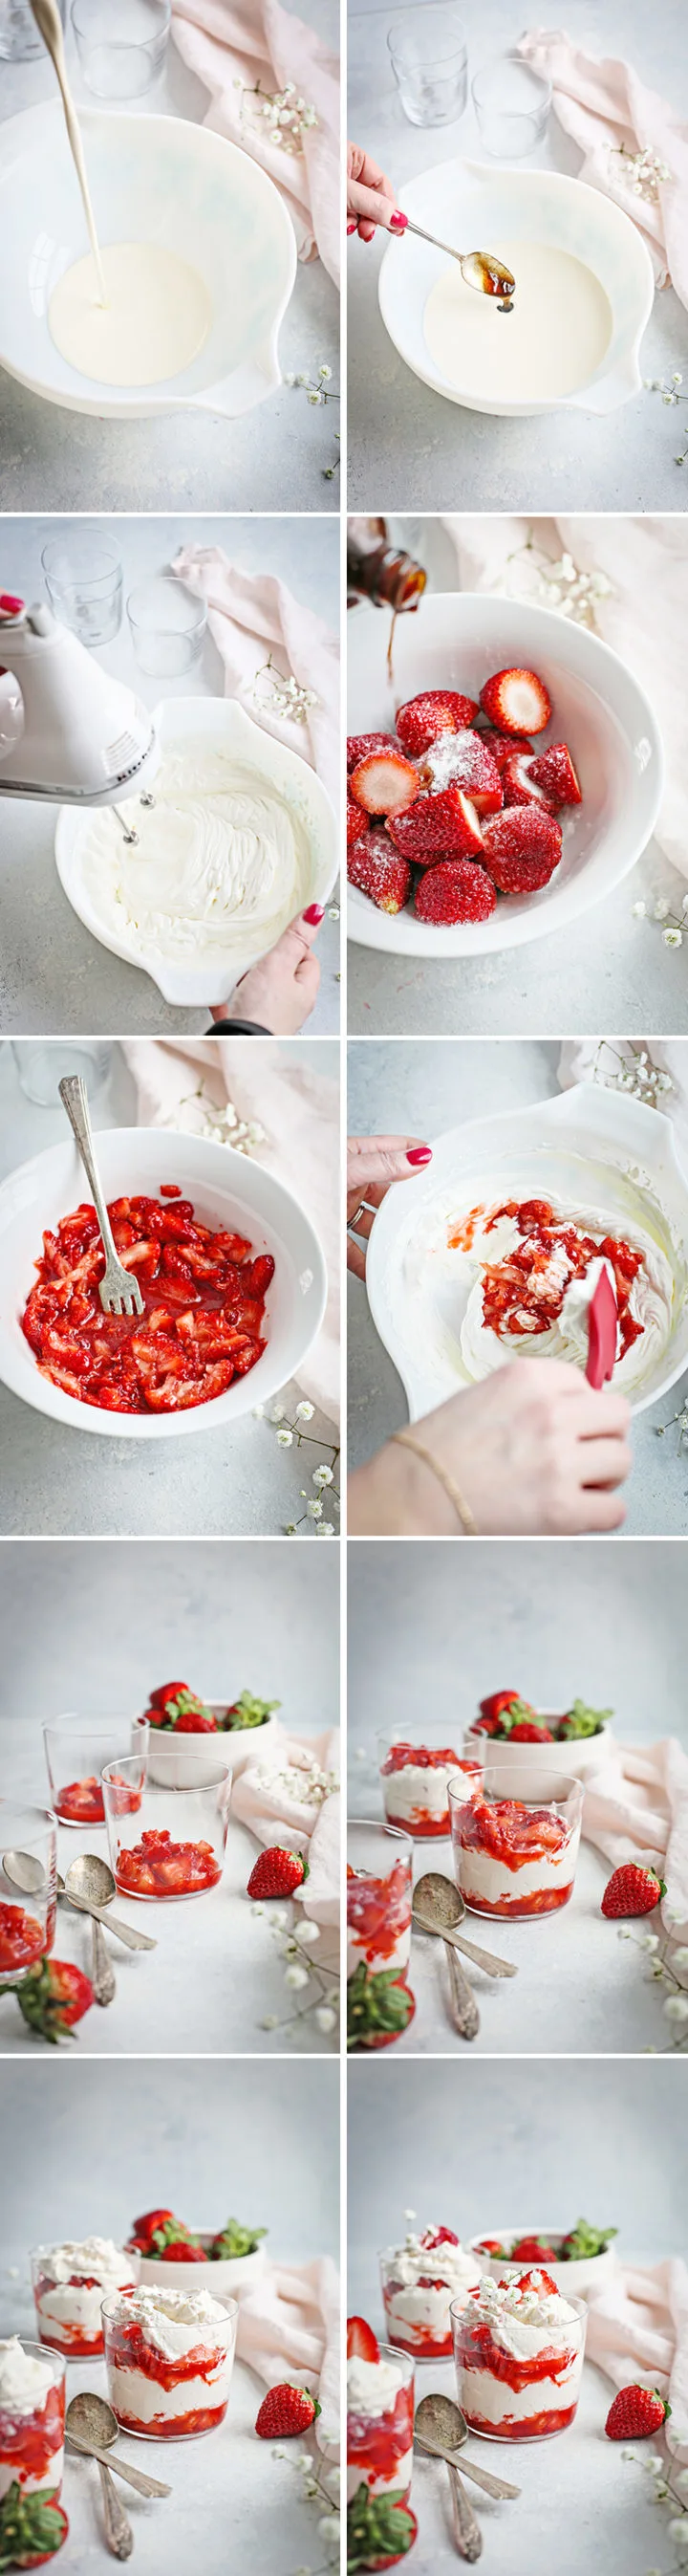 step by step photos showing how to make strawberries and cream